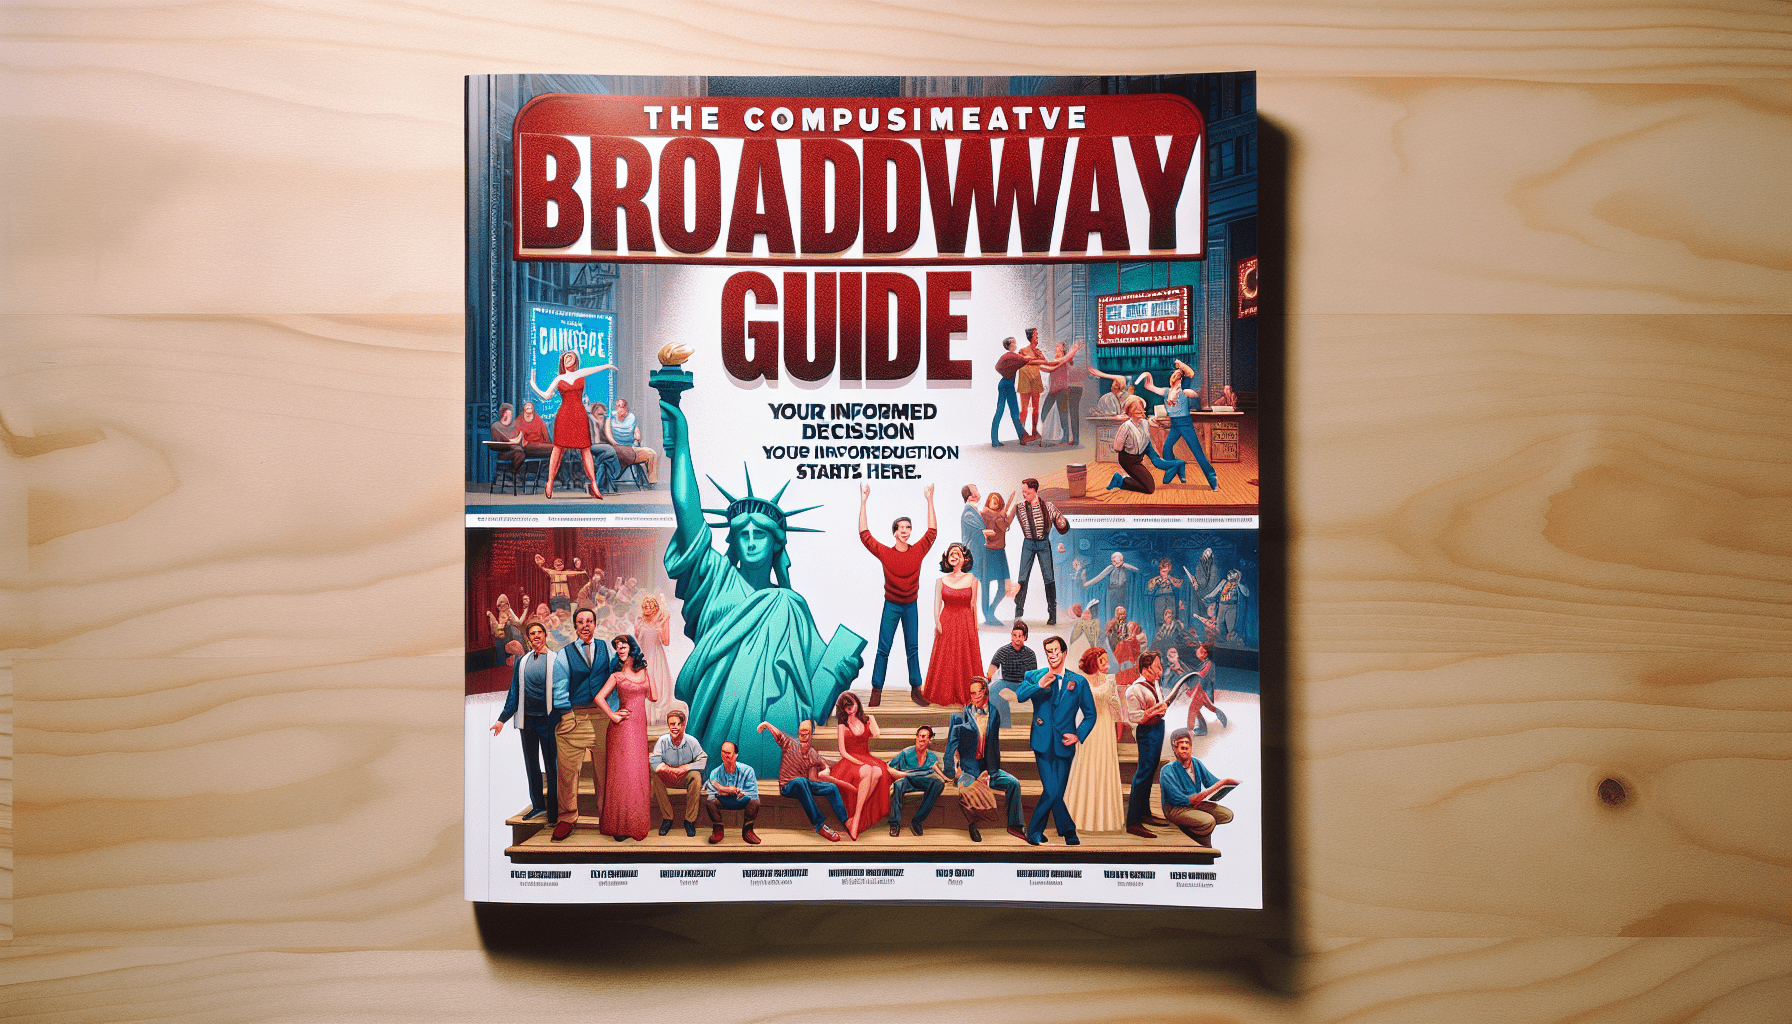 What Are The Top 3 Broadway Shows?